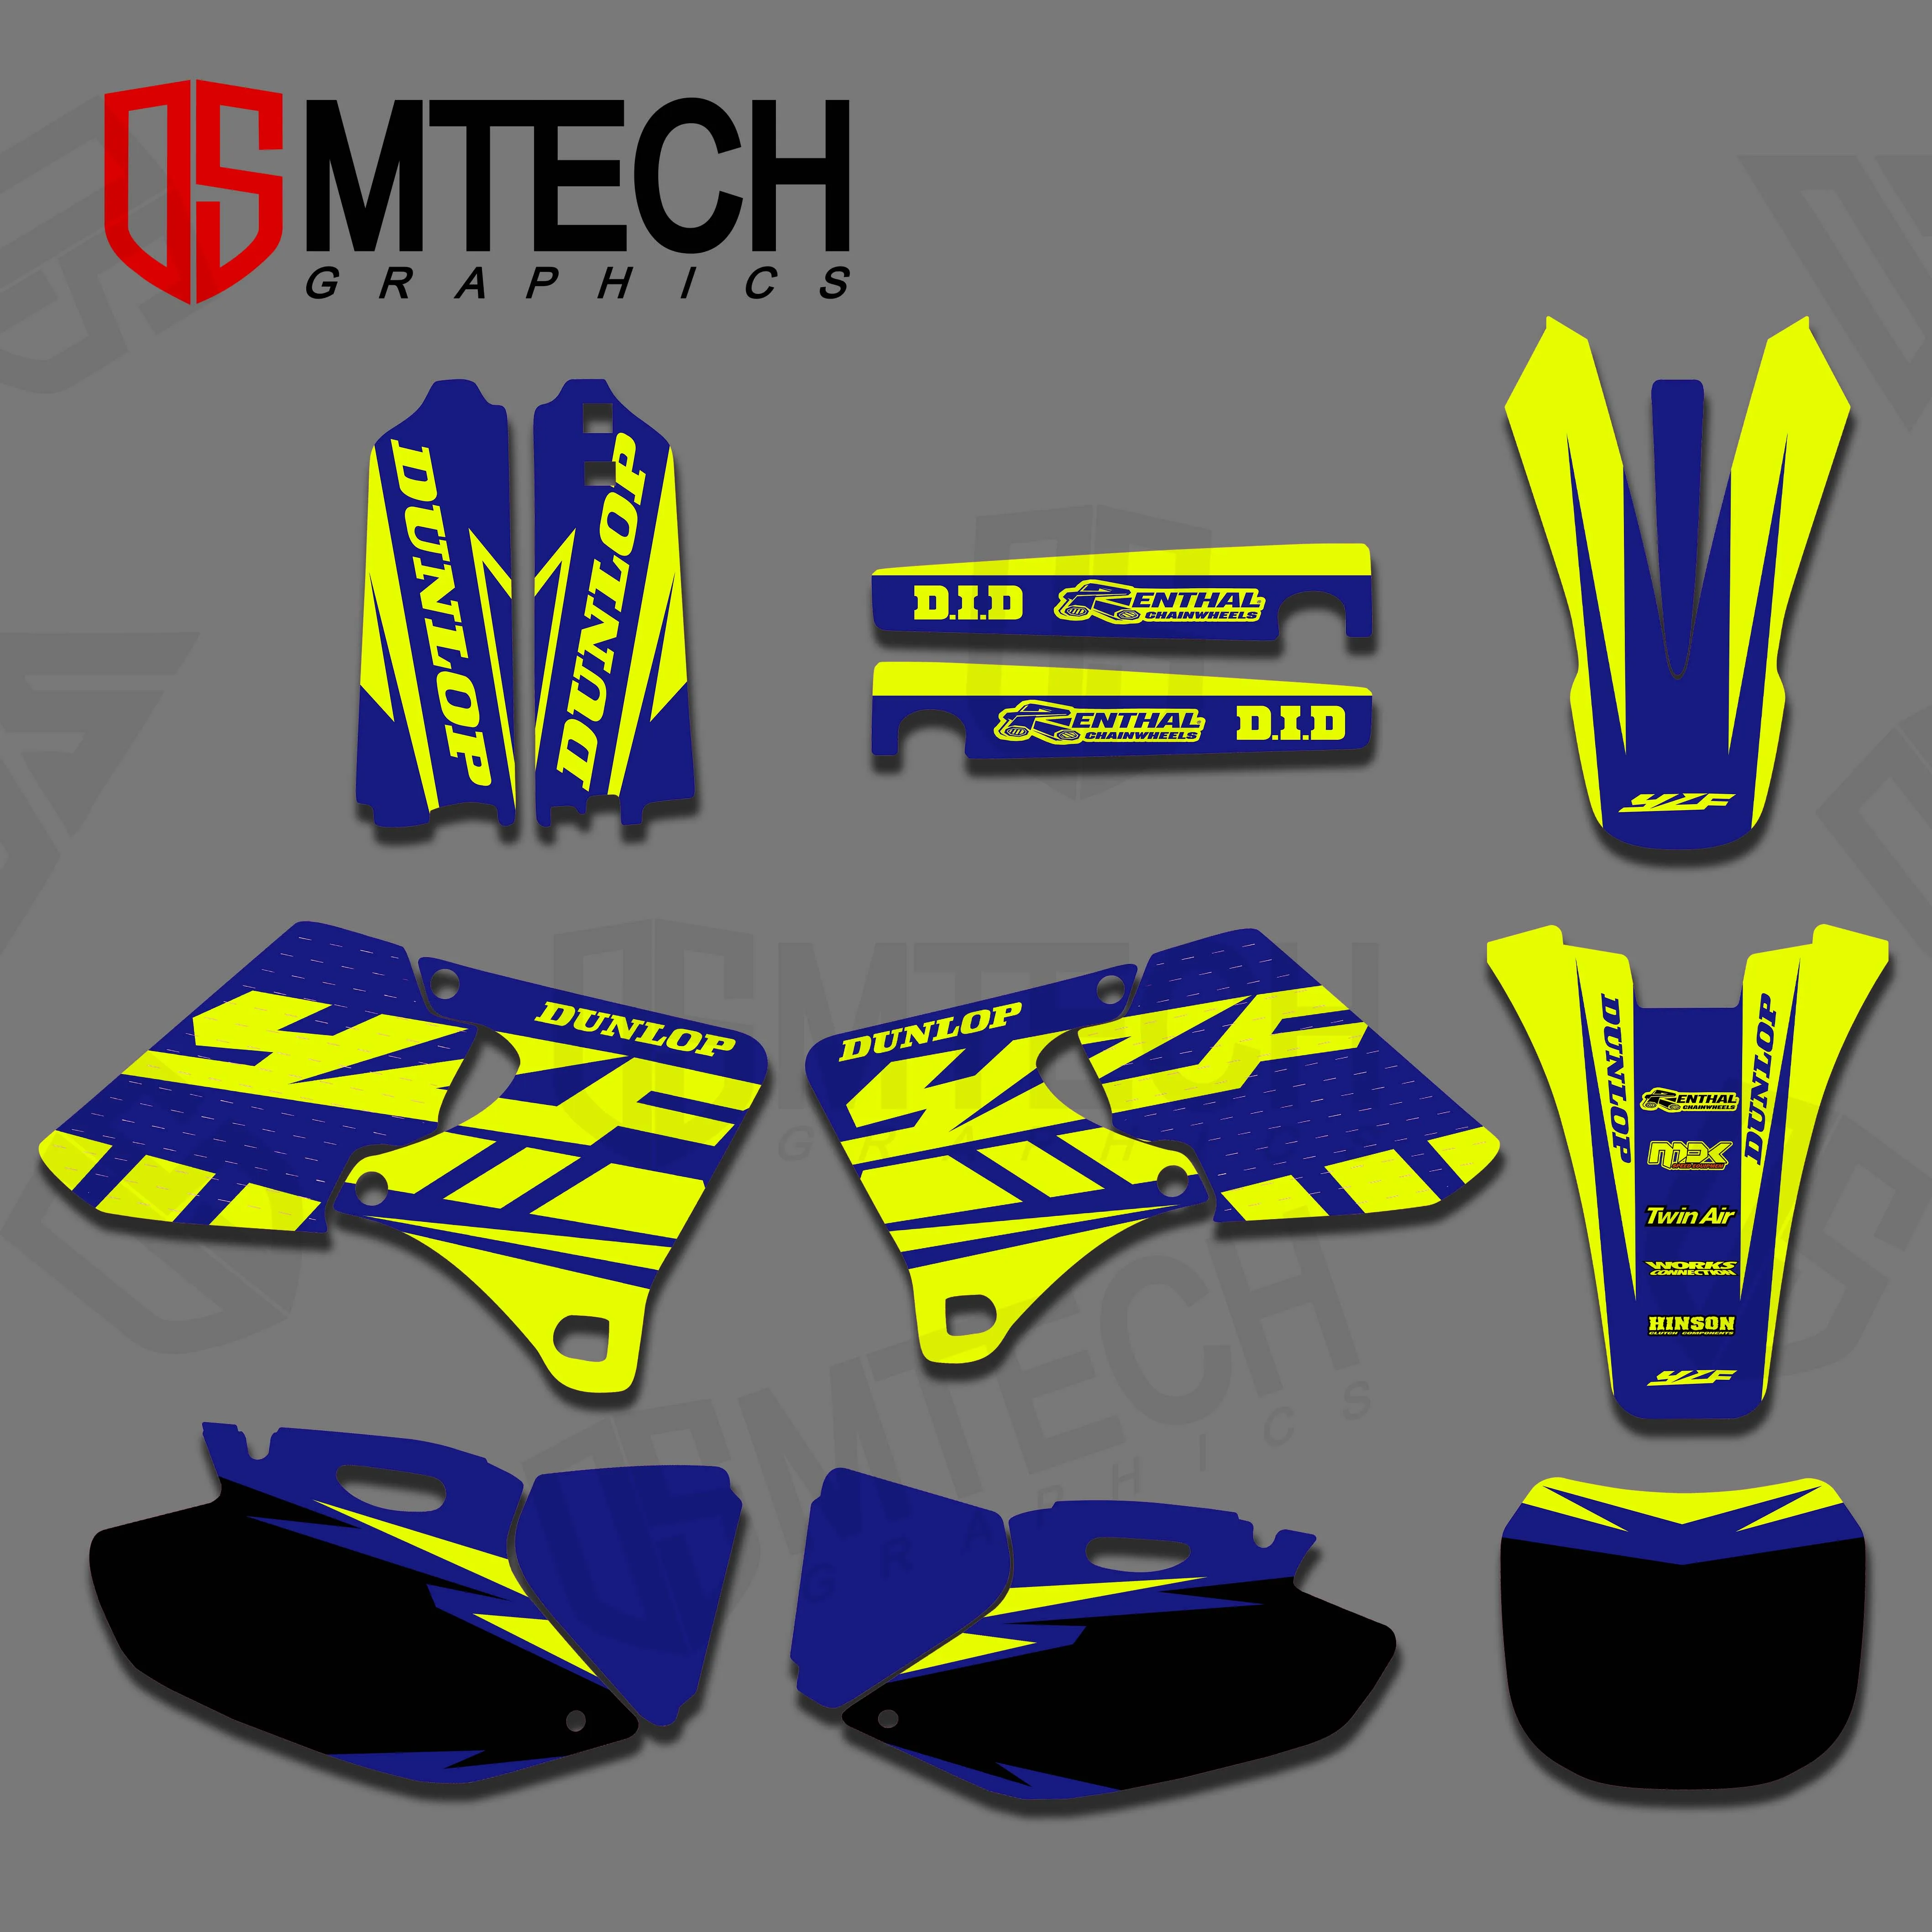 DSMTECH GRAPHICS & BACKGROUNDS DECALS STICKERS Kits for Yamaha YZ250F YZ400F YZ426F YZF 250F 400F 426F 1998 1999 2000 2001 2002 46x58 46 58 motorcycle part front fork damper oil and dust seal for yamaha wr426f wr 426f yz 426f yz426f 2000 2001 2002